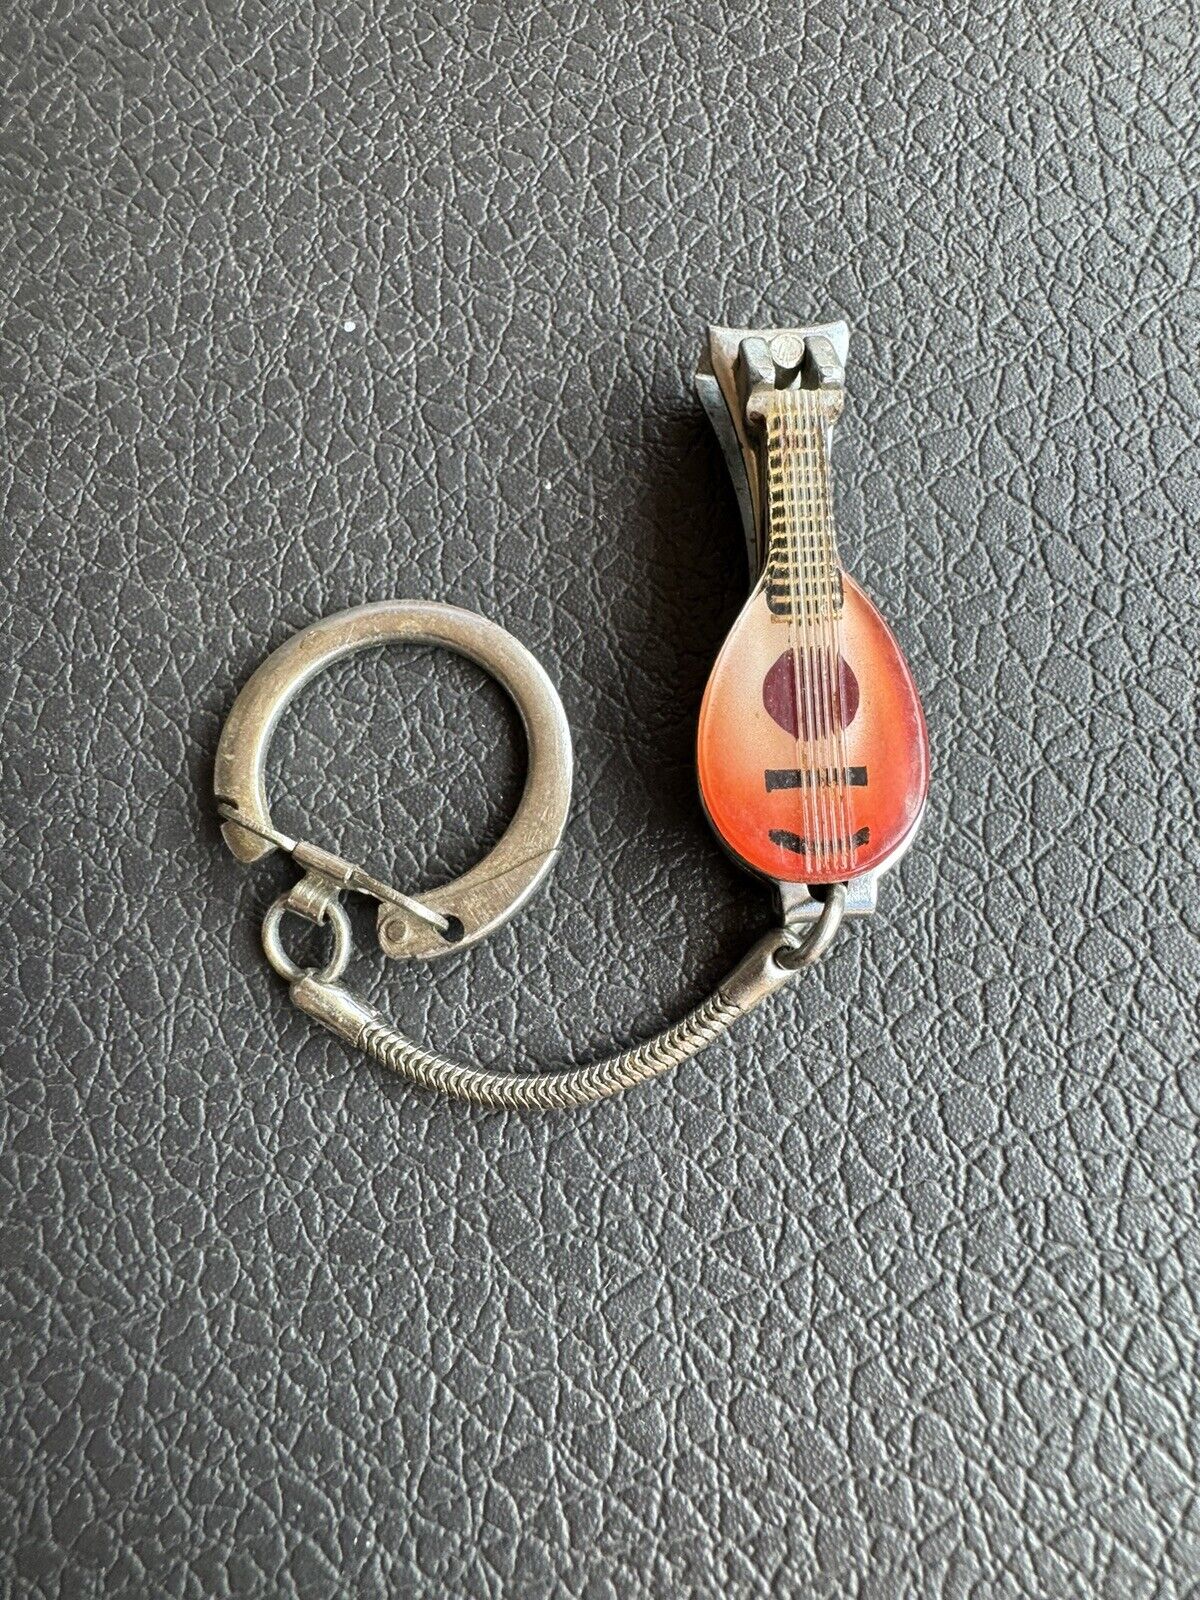 VINTAGE LUTE CLIPPERS KEYCHAIN